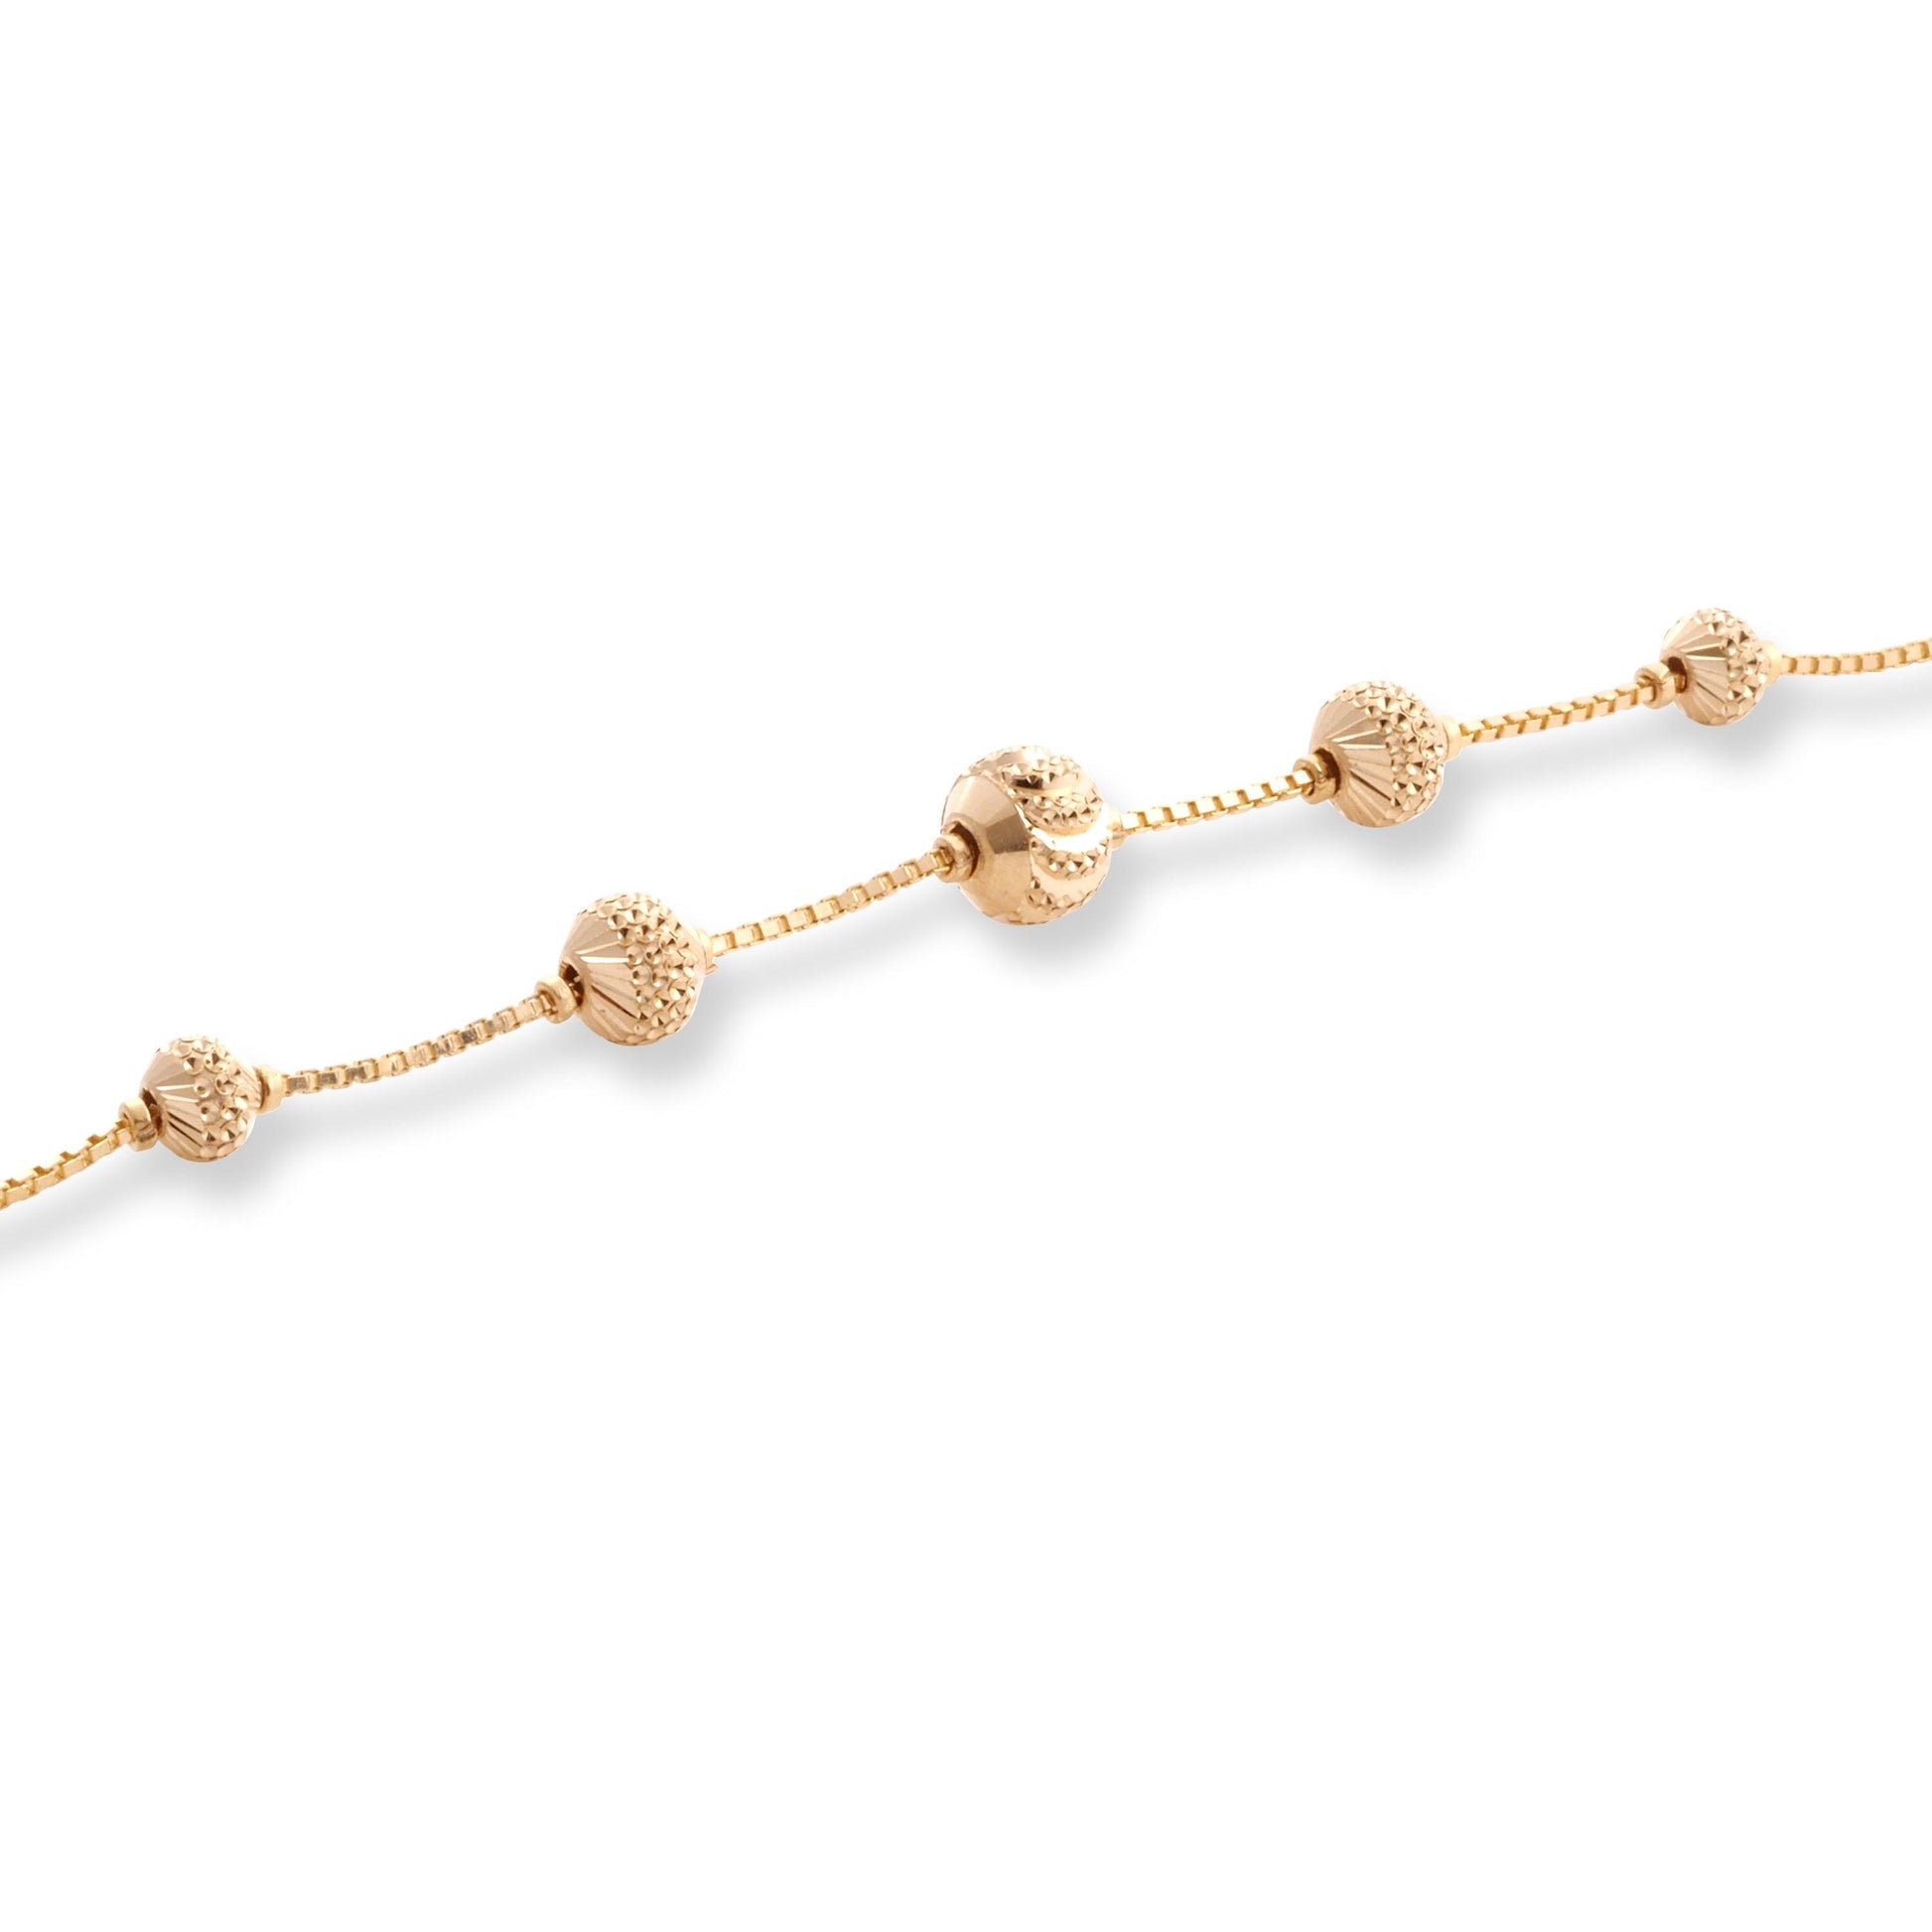 22ct Yellow Gold Bracelet in Diamond Cutting Beads Design with '' S '' Clasp LBR-8507 - Minar Jewellers